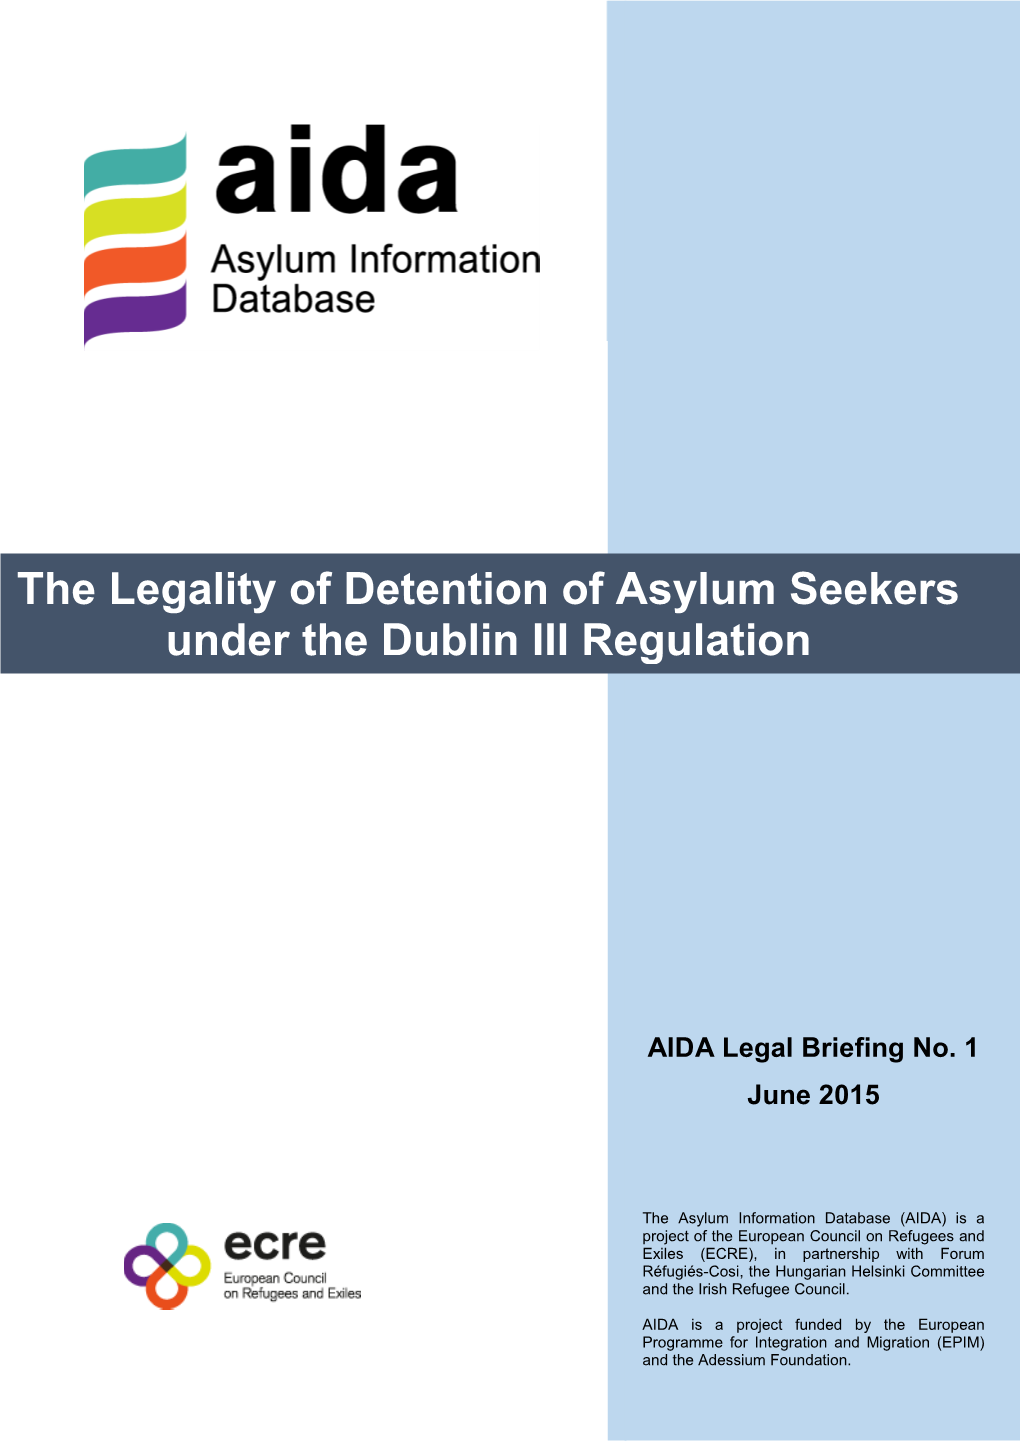 The Legality of Detention of Asylum Seekers Under the Dublin III Regulation